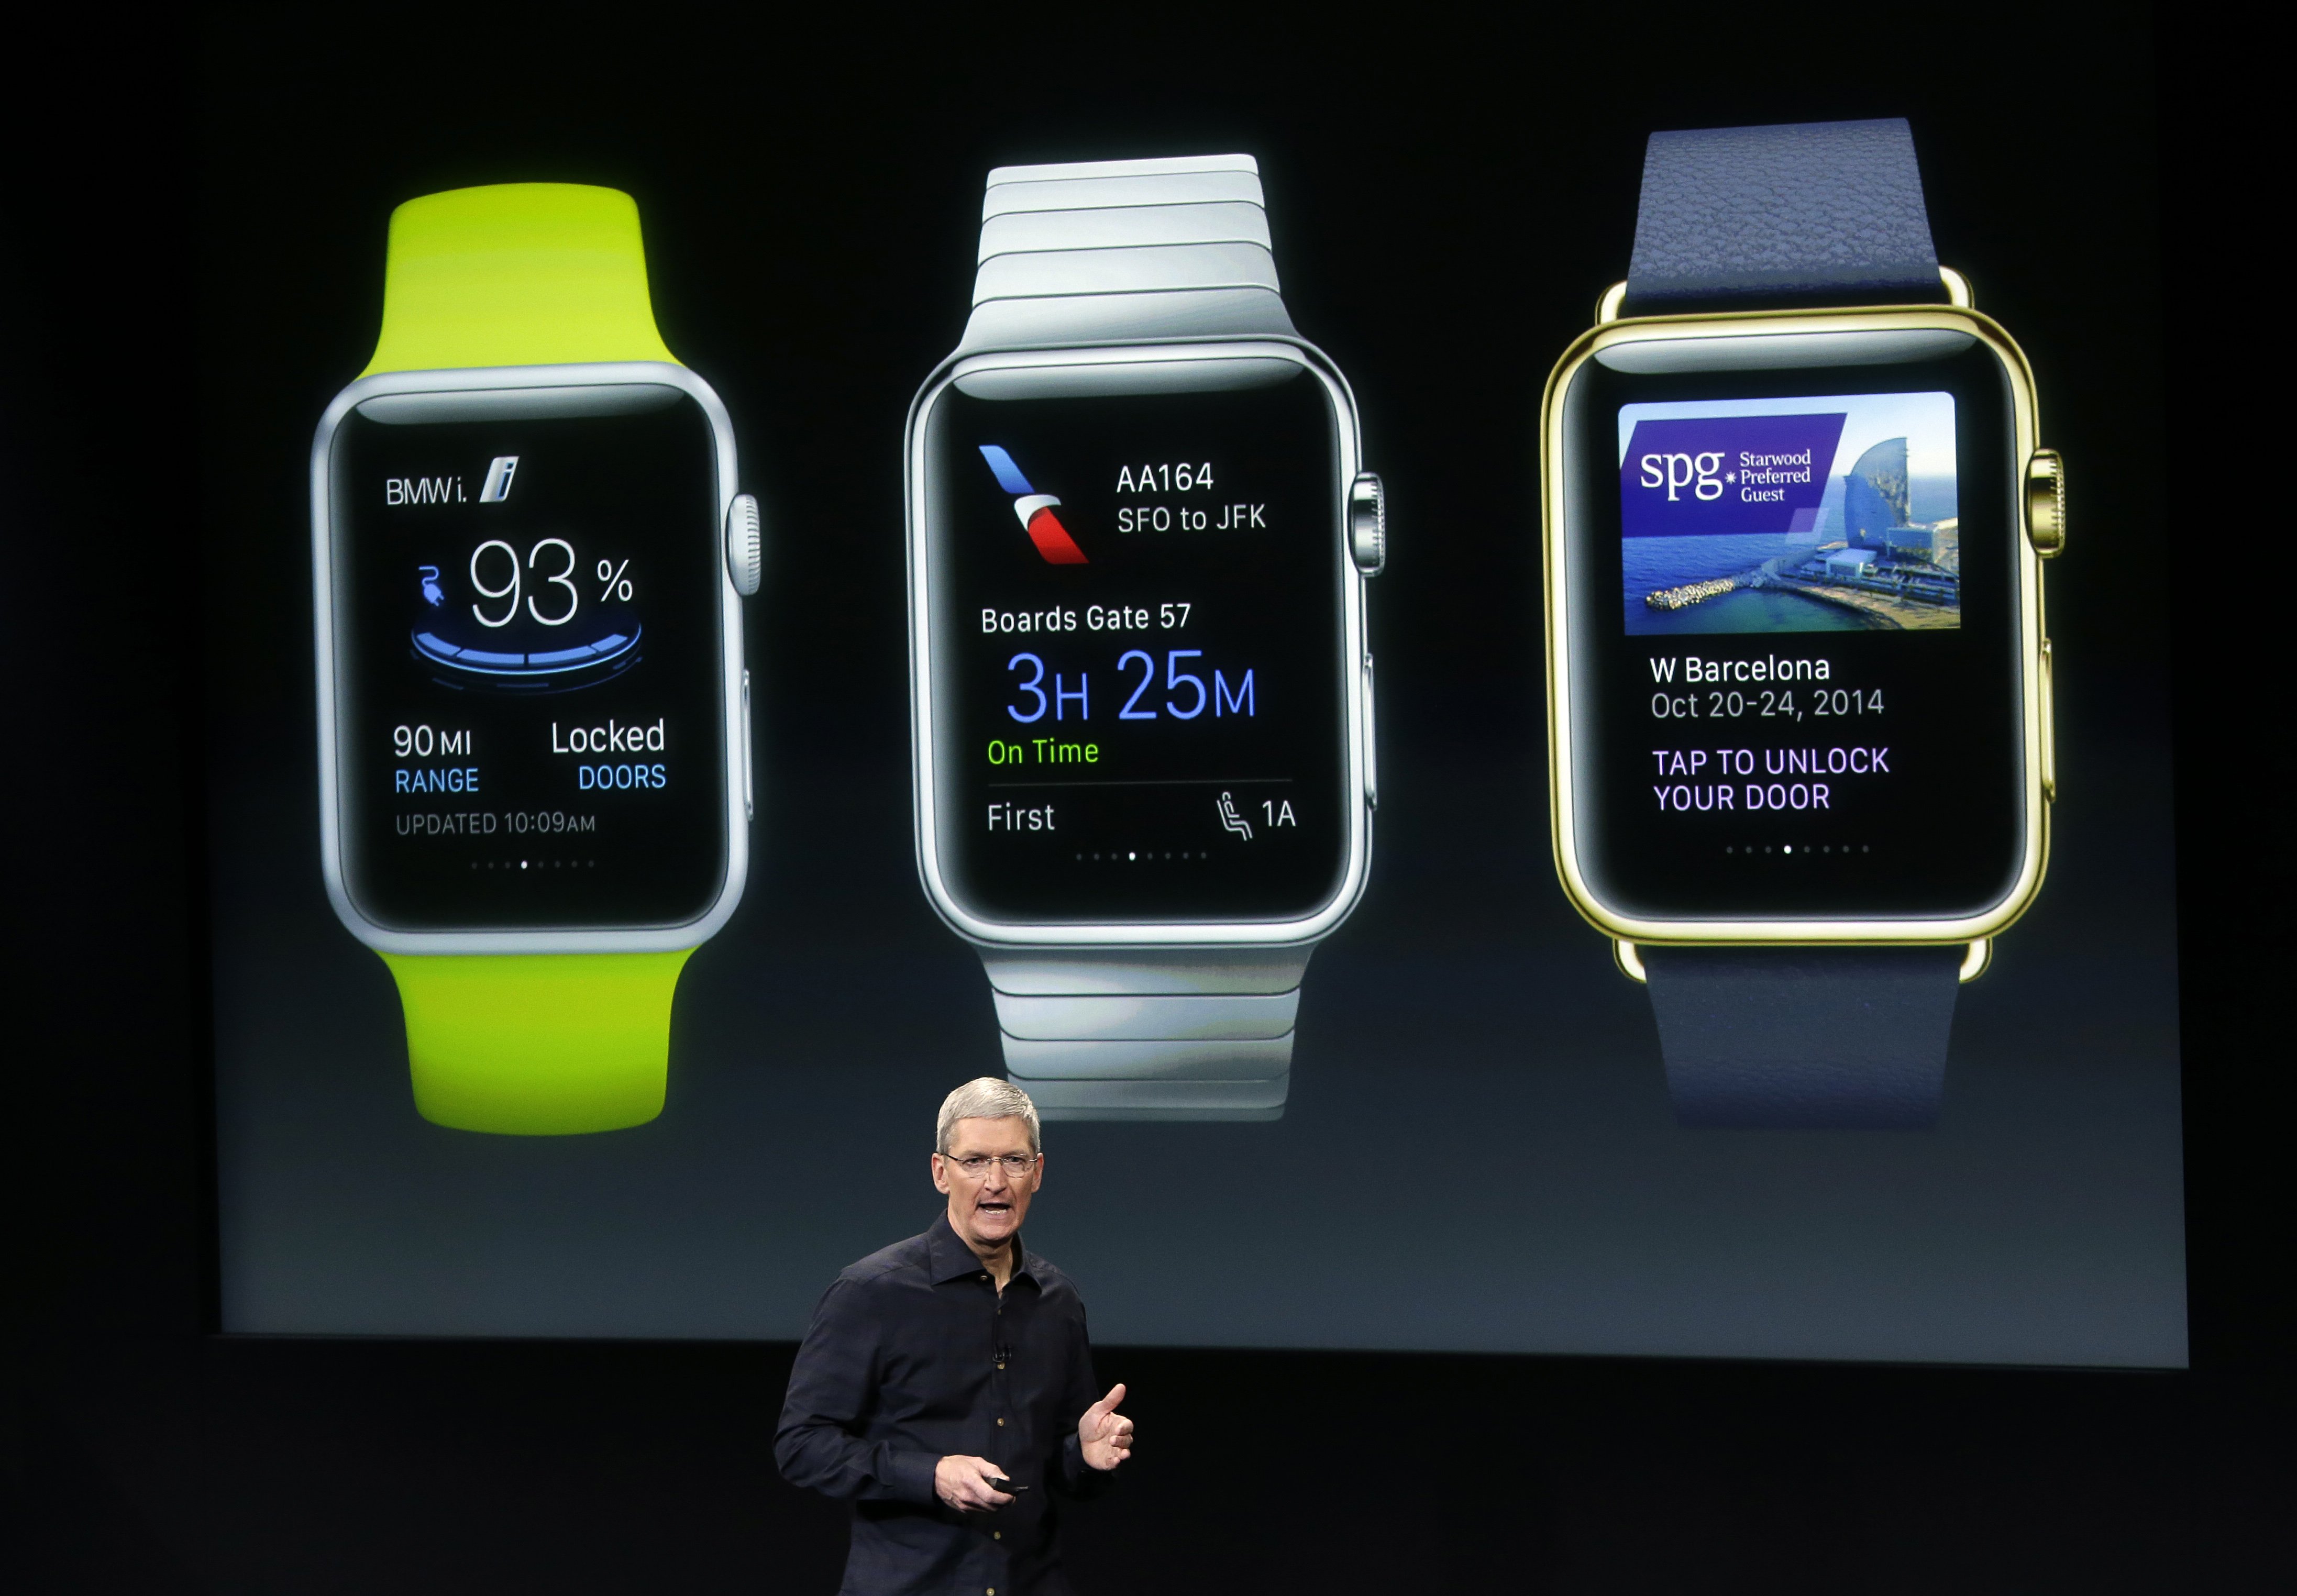 Apple CEO Tim Cook discusses the new Apple Watch during an event at Apple headquarters on Thursday, Oct. 16, 2014 in Cupertino, Calif. (AP Photo/Marcio Jose Sanchez)